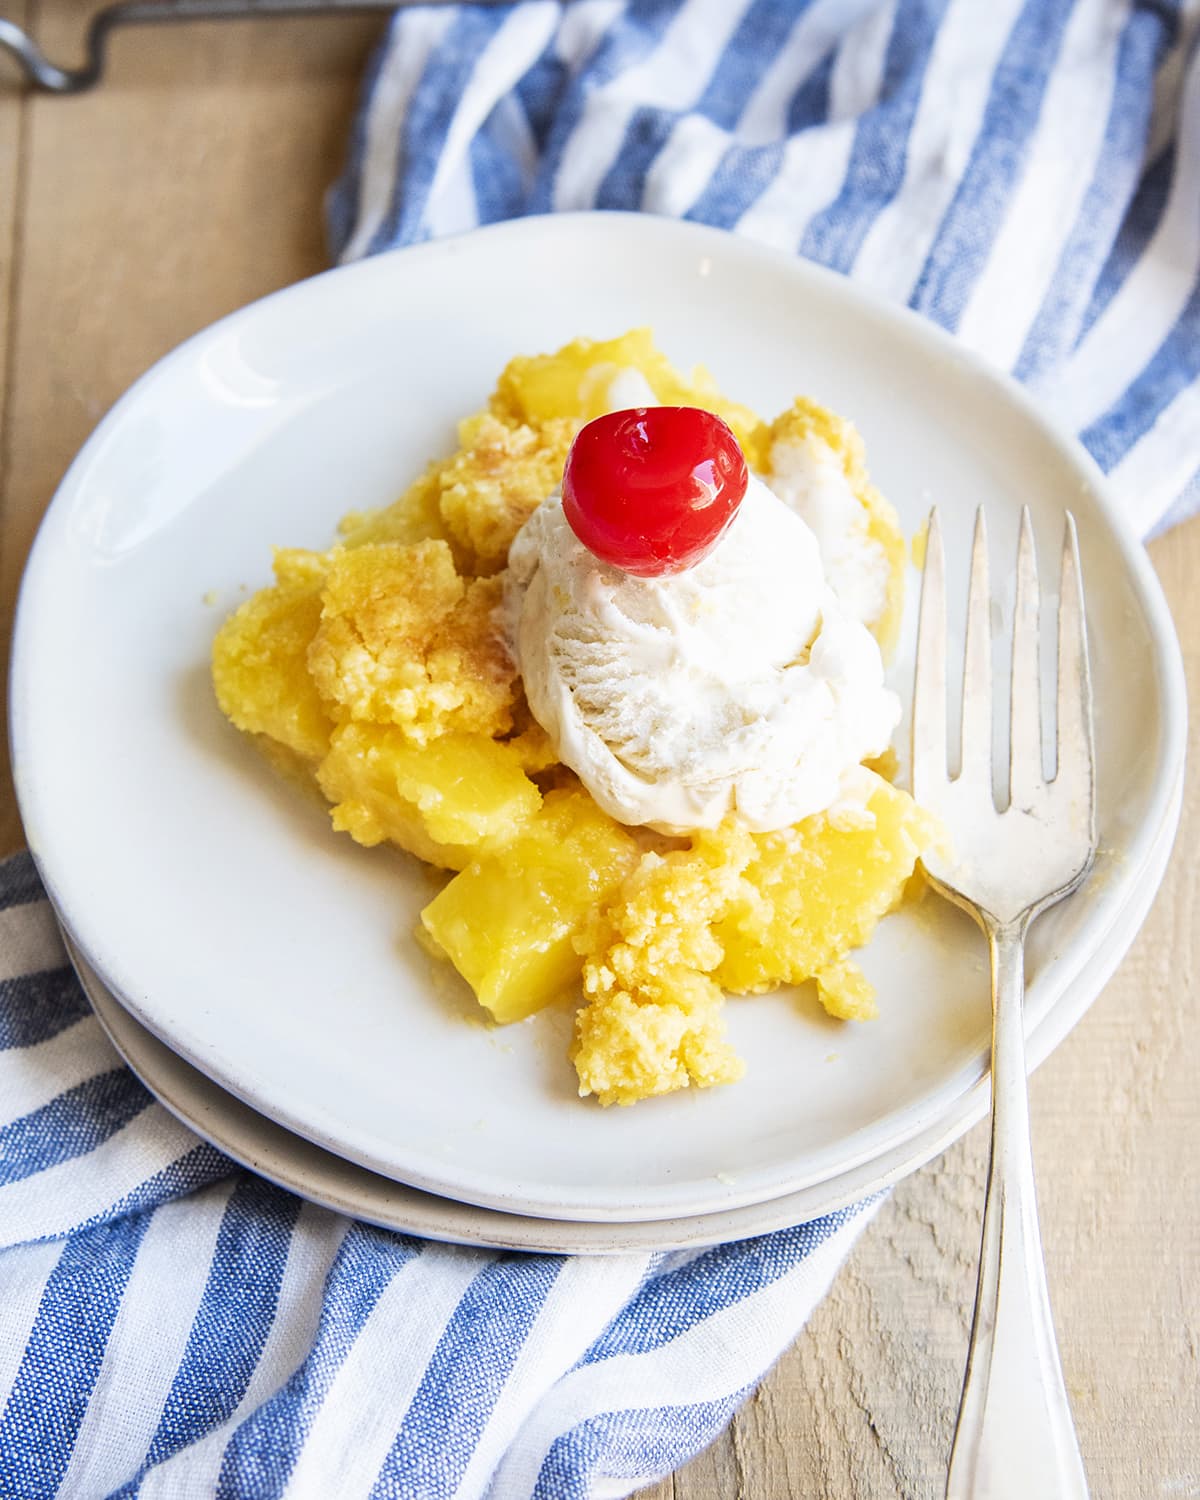 Pineapple dump cake on a plate topped with a scoop of vanilla ice cream and a red cherry.